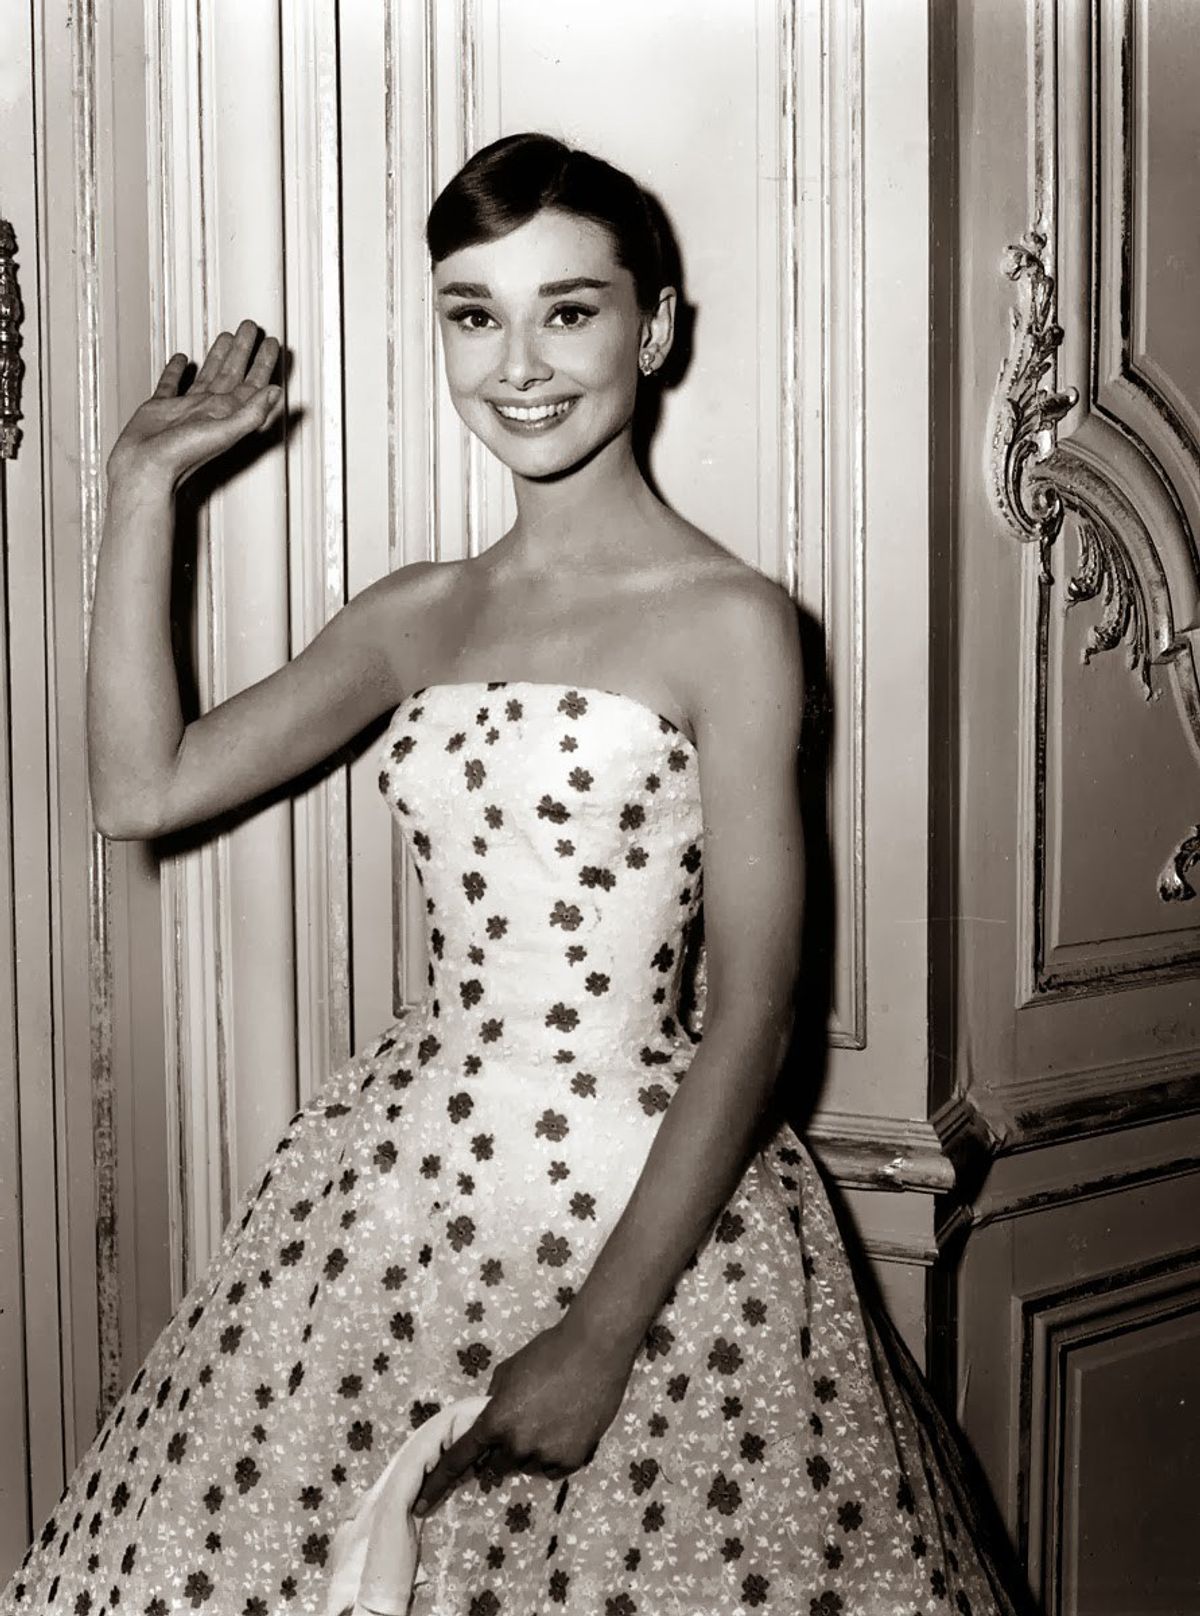 12 Quotes From Audrey Hepburn On Being Sophisticated, Upbeat And Stylish